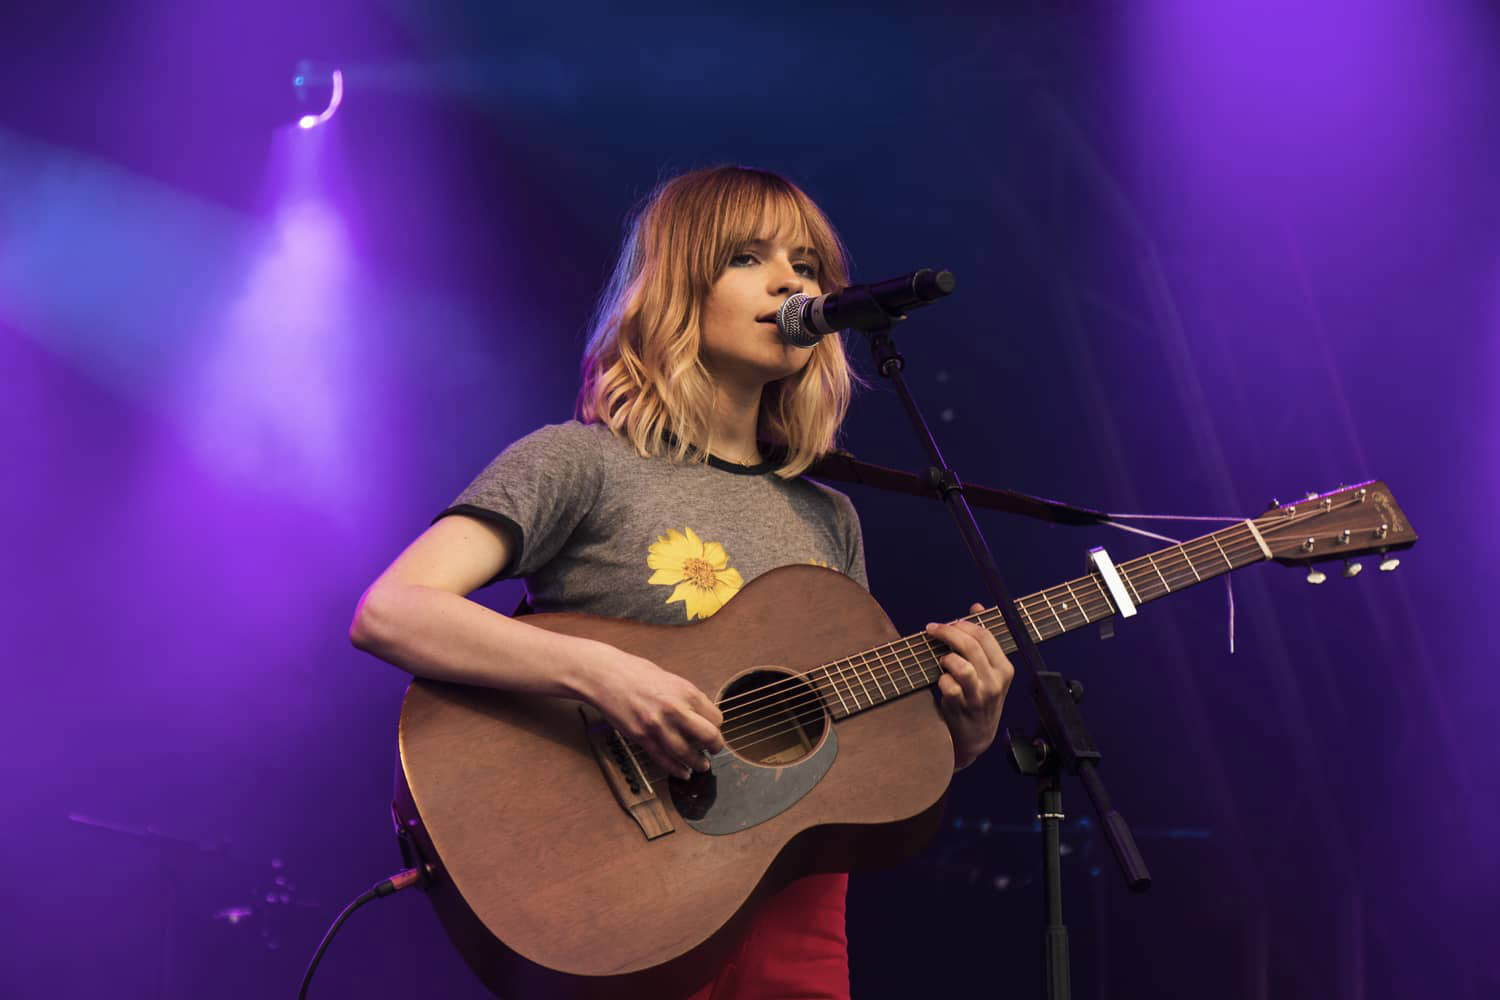 Main stage attractions included Gabrielle Aplin